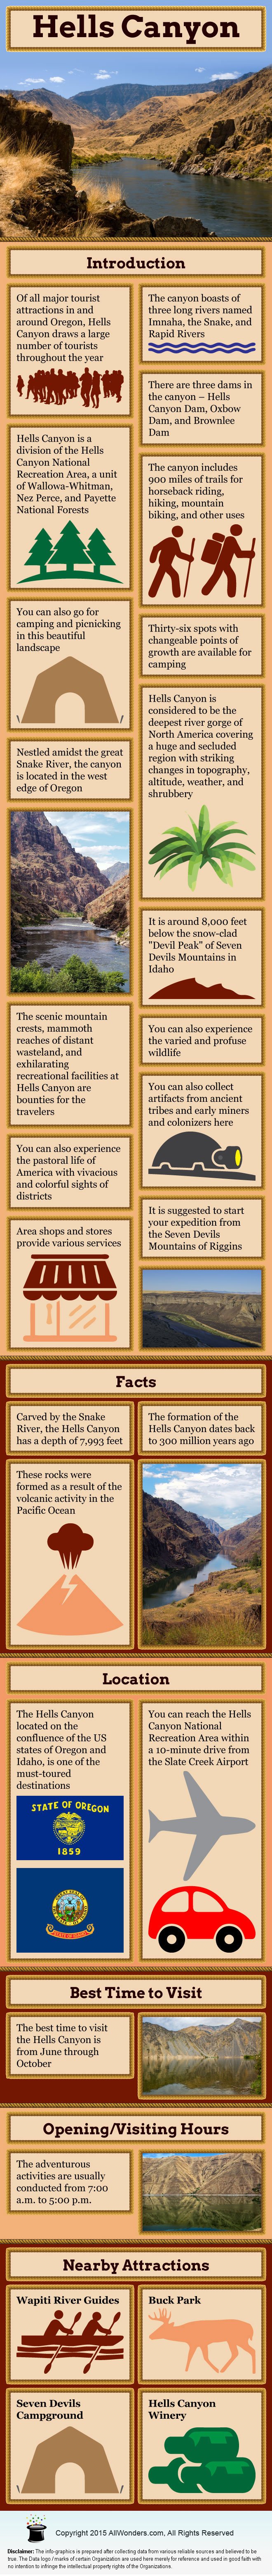 Hells Canyon Infographic